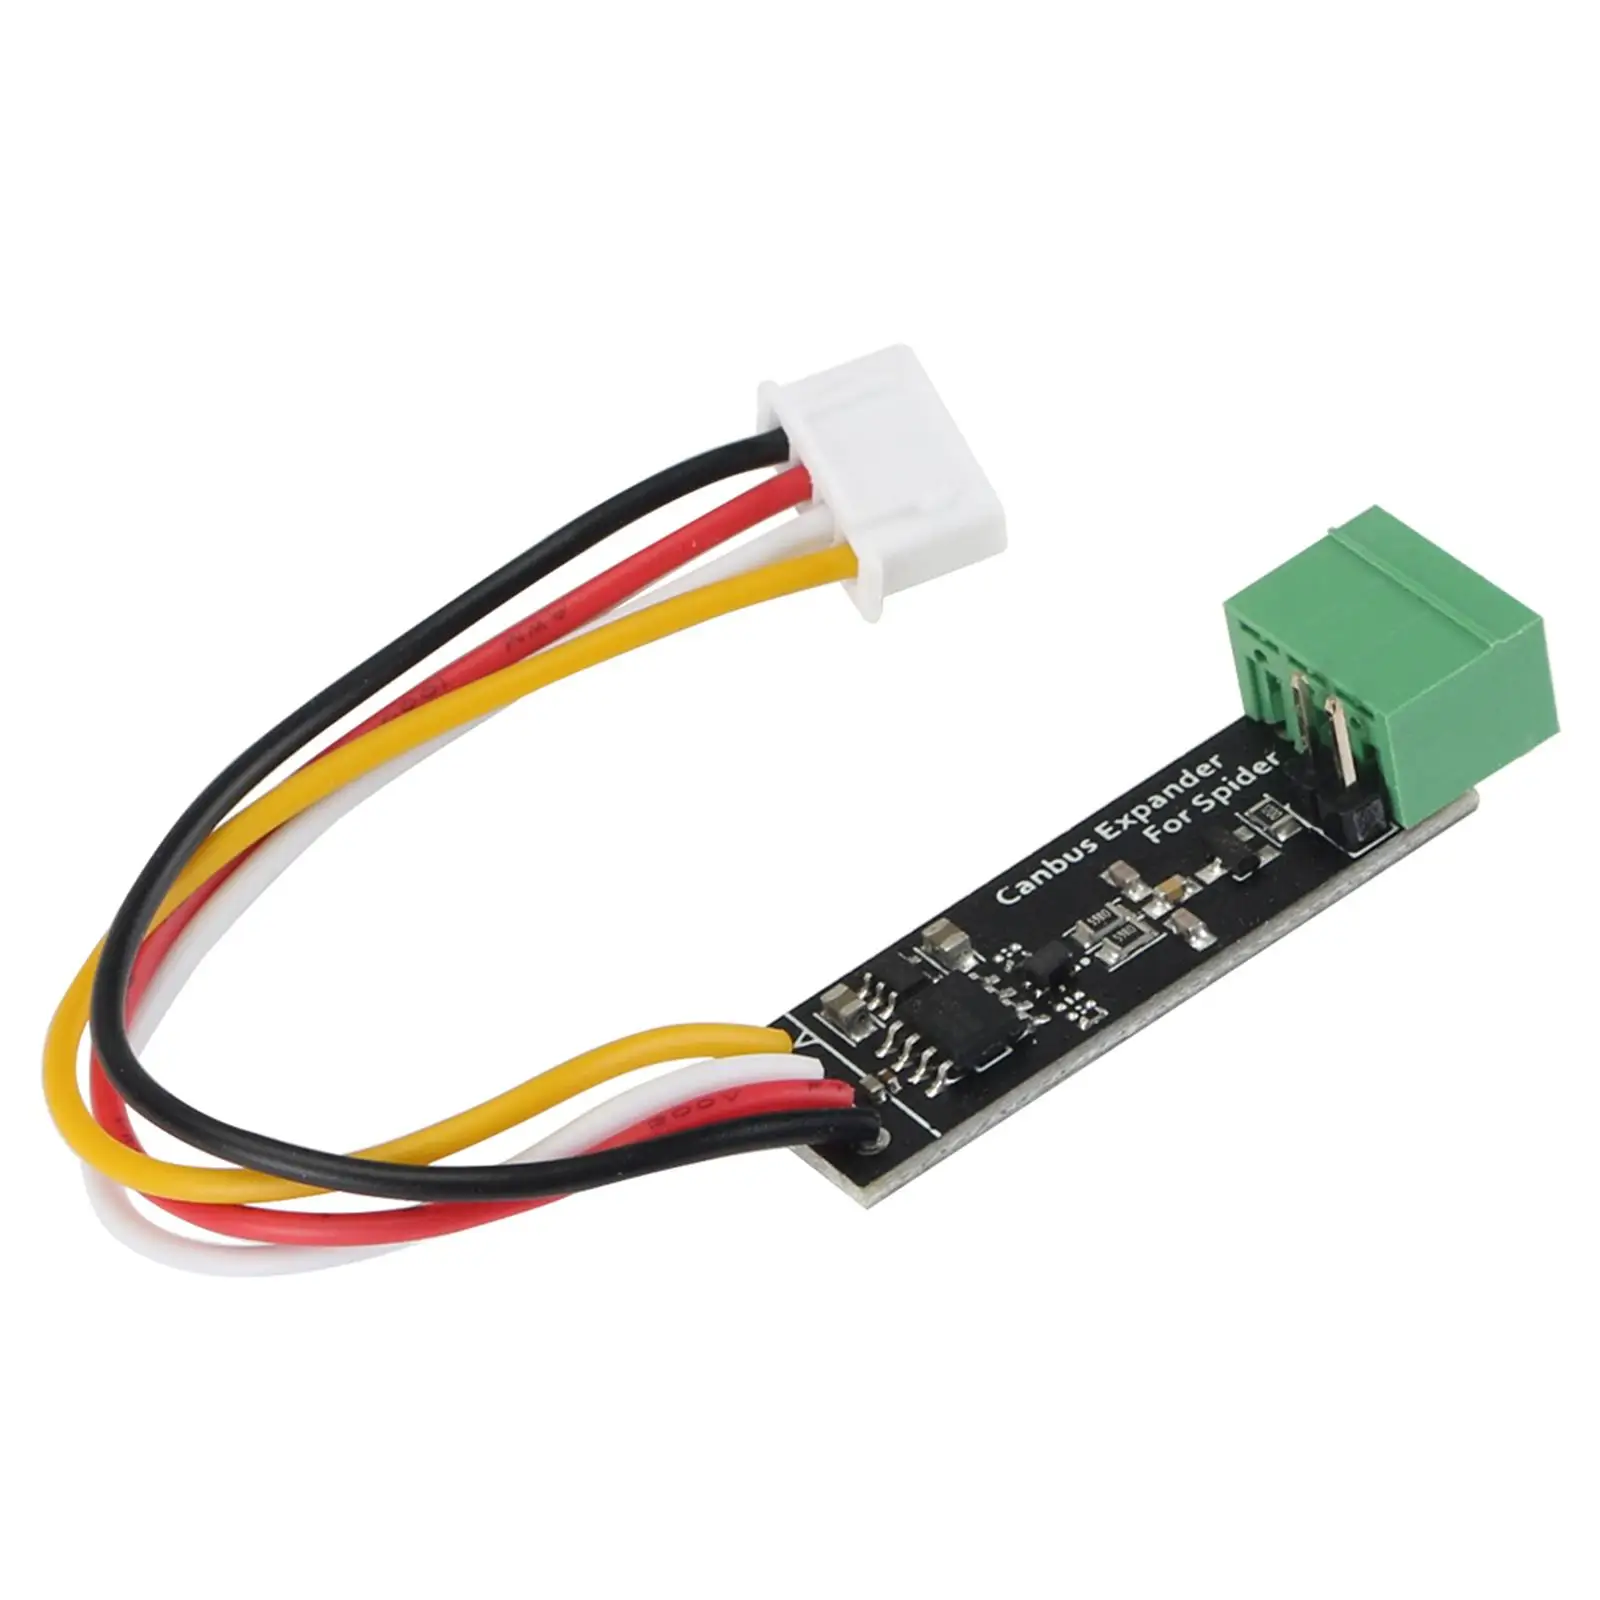 Canbus Expander Module Durable Replacement Easy to Install Accessory for Spider Board